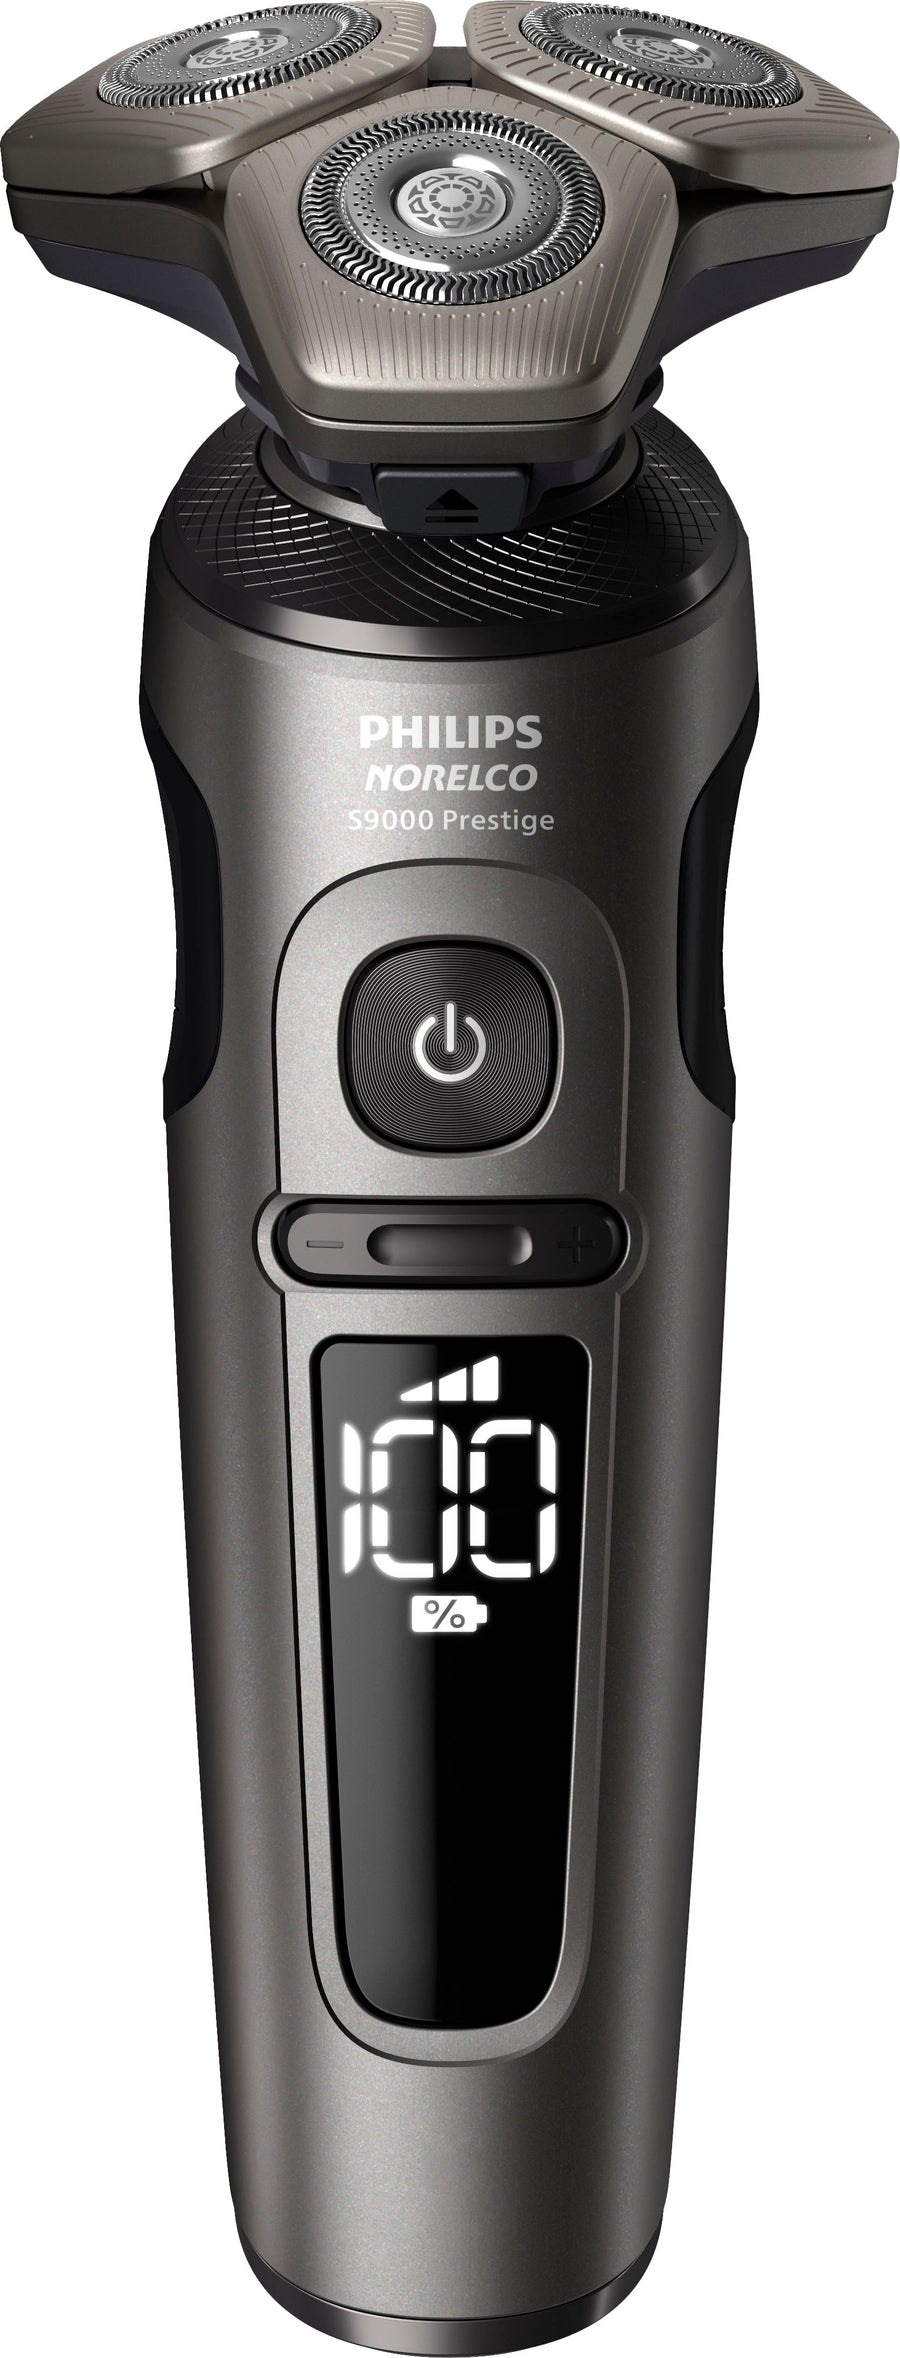 Philips Norelco - 9000 Prestige Shaver with Qi Charging Pad SP9872/86 - Black_0